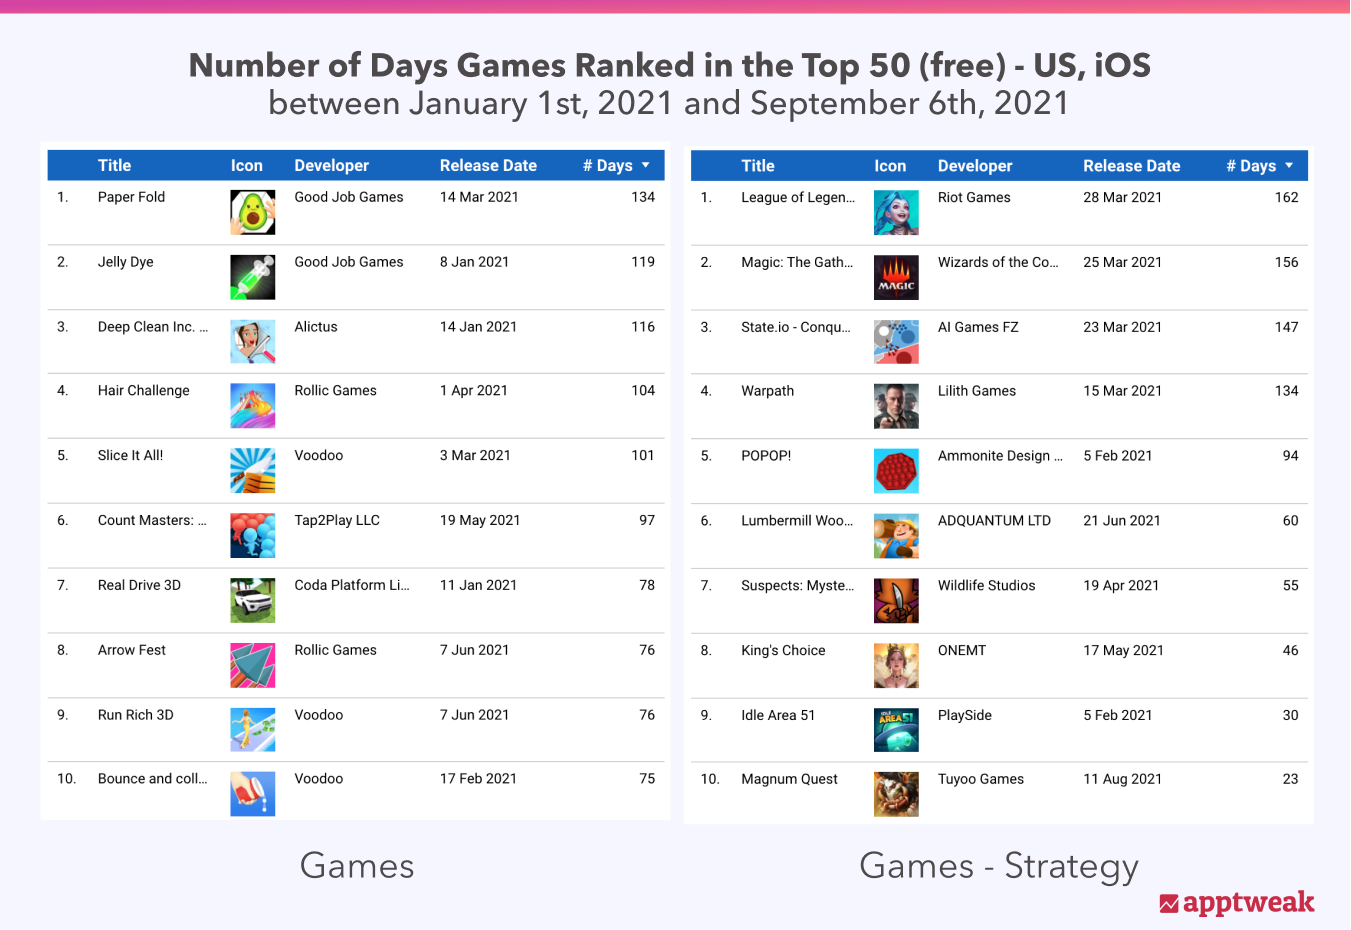 Number of days games ranked in the top 50 in the categories “Games” and “Games - Strategy” in 2021 (US, iOS)